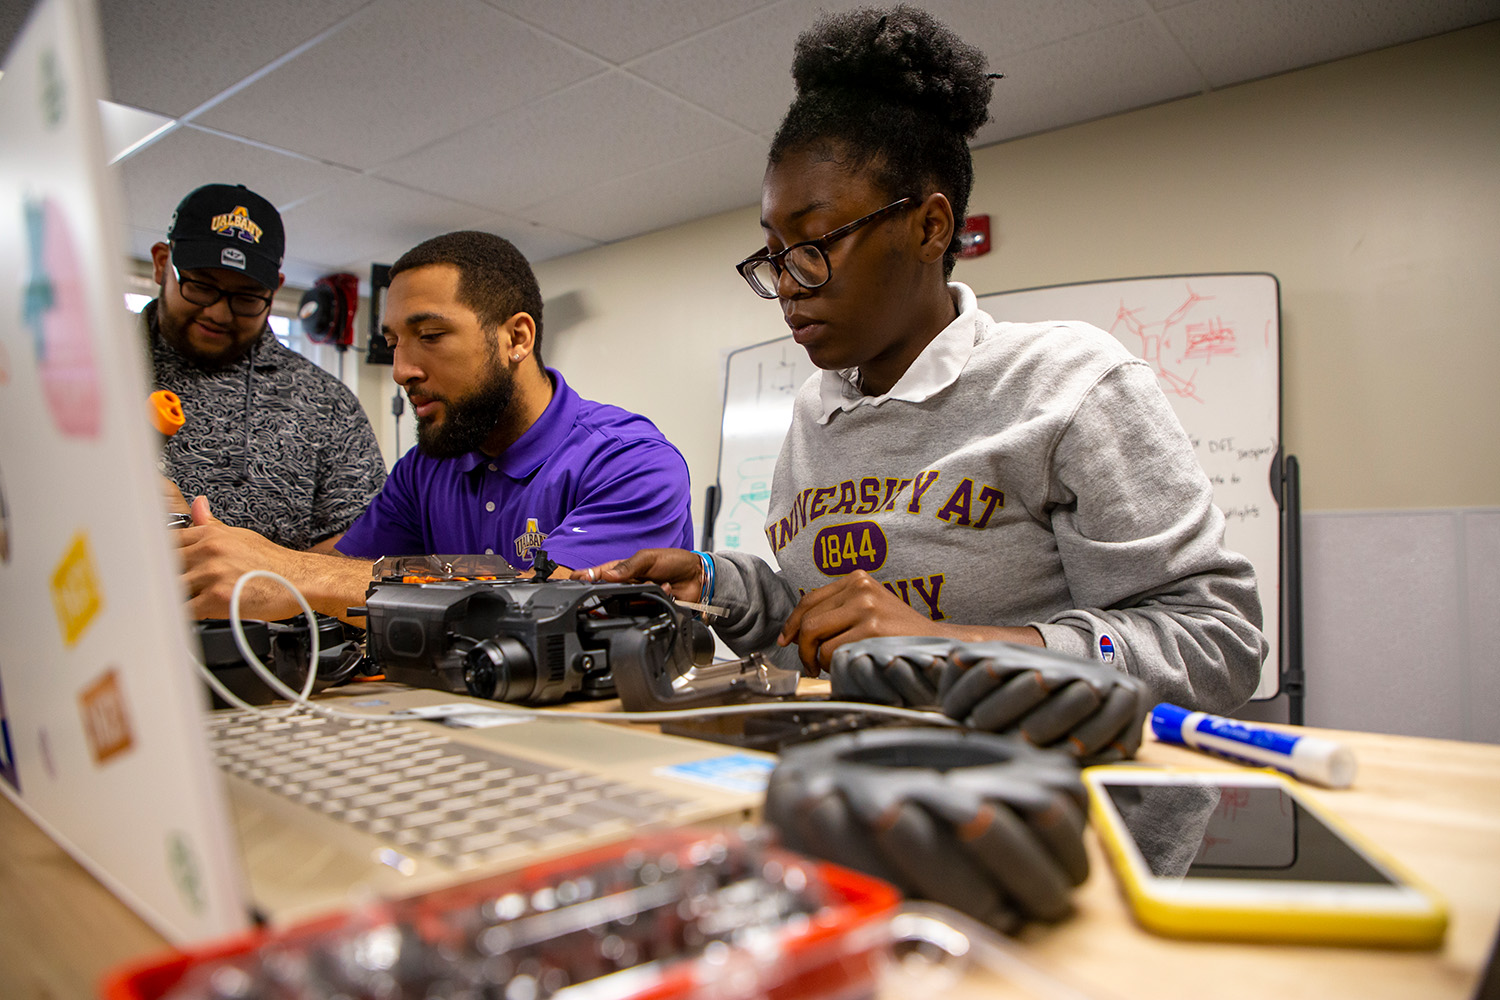 Students working in UAlbany’s Informatics Lab